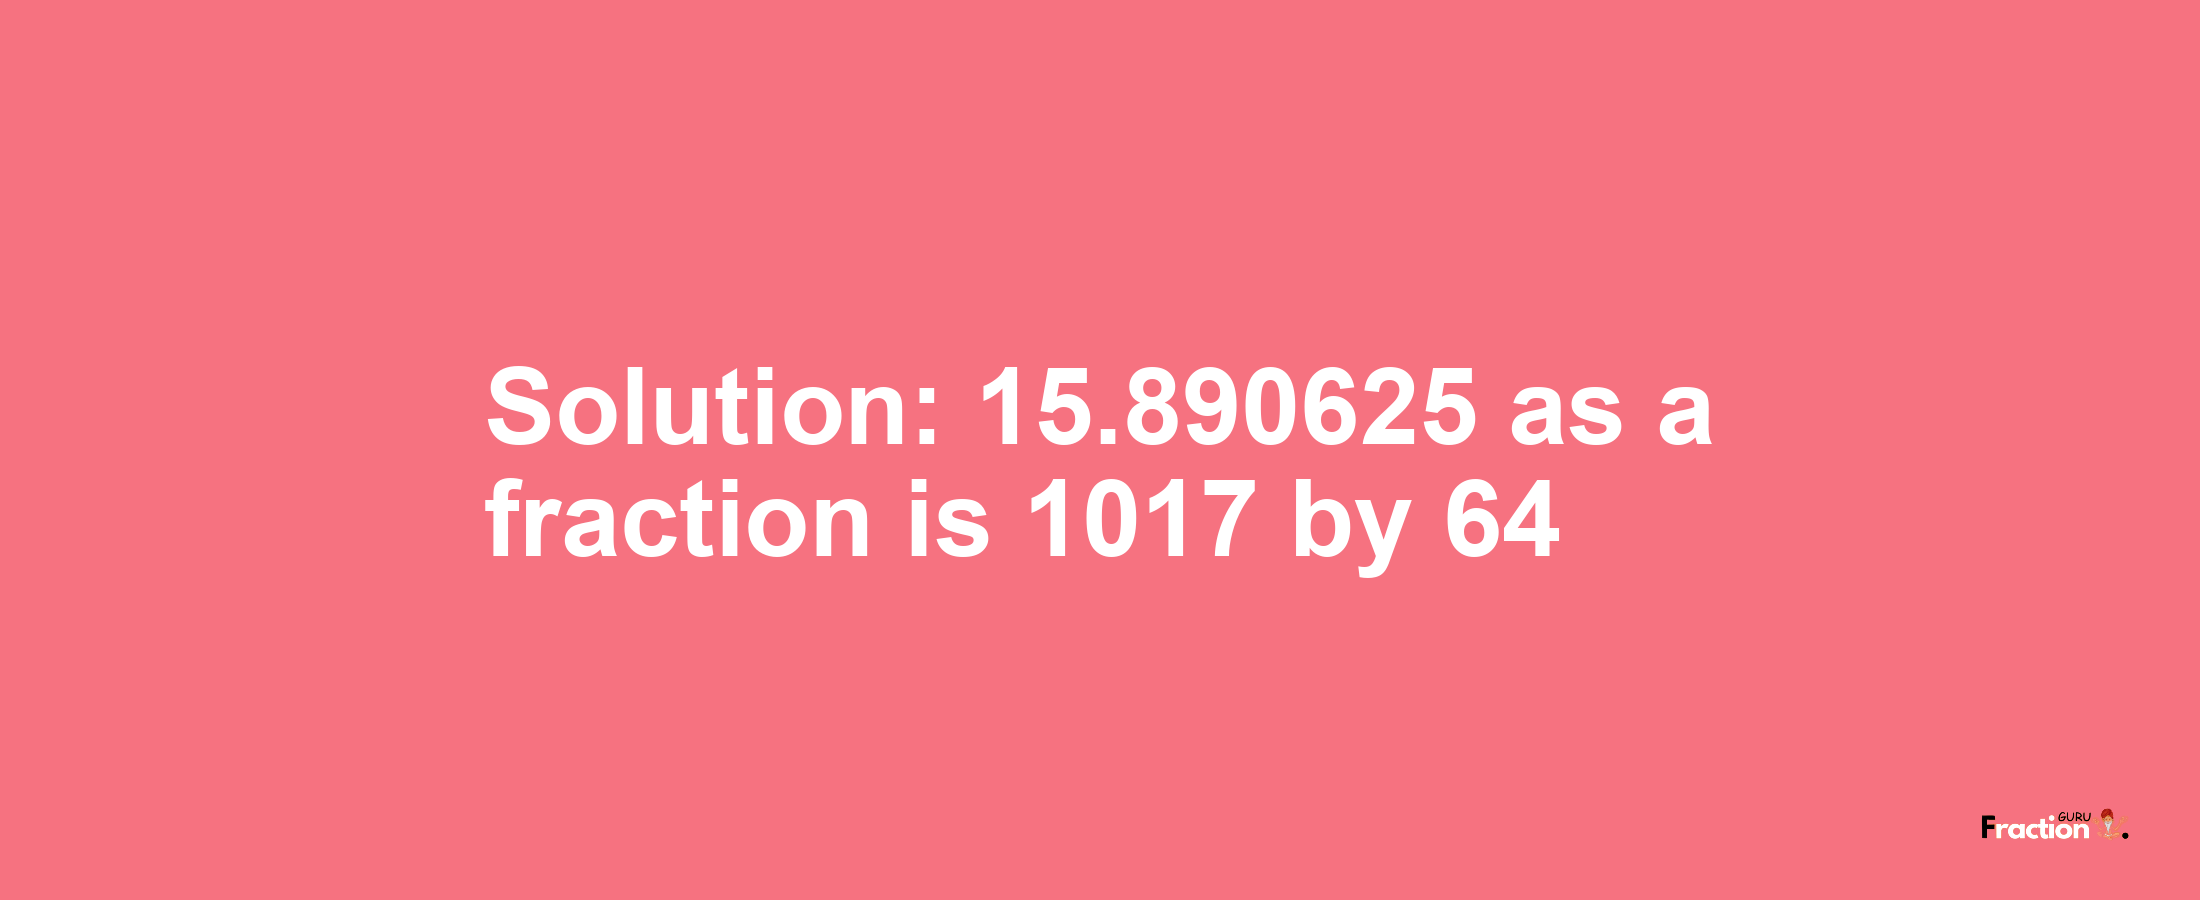 Solution:15.890625 as a fraction is 1017/64